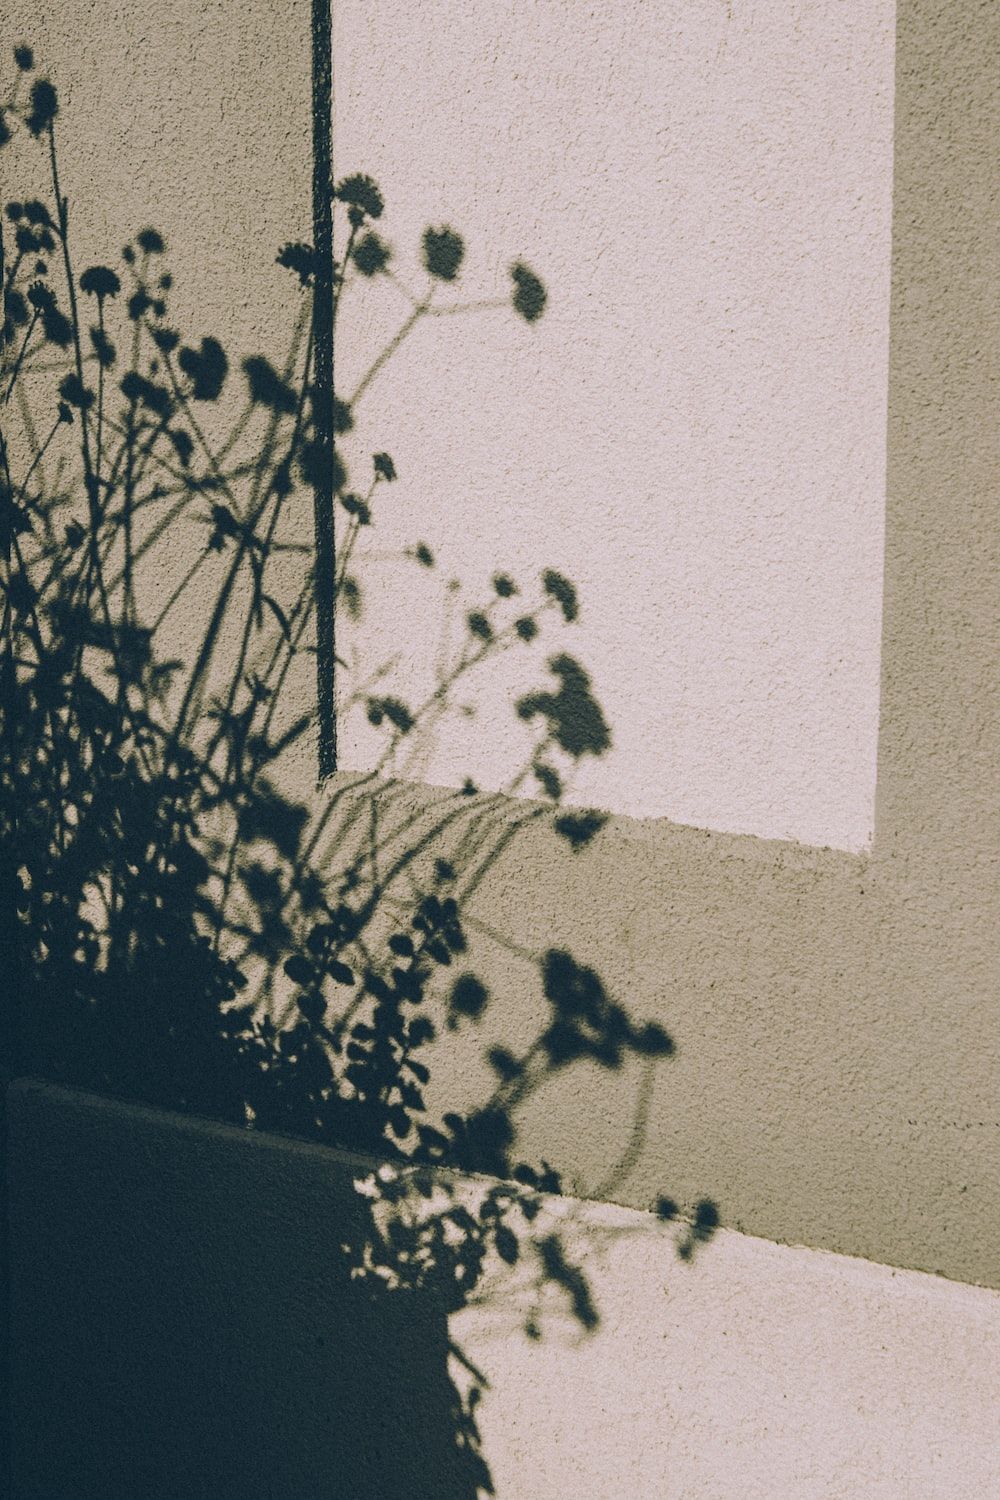 Shadow of a plant on a wall - Shadow